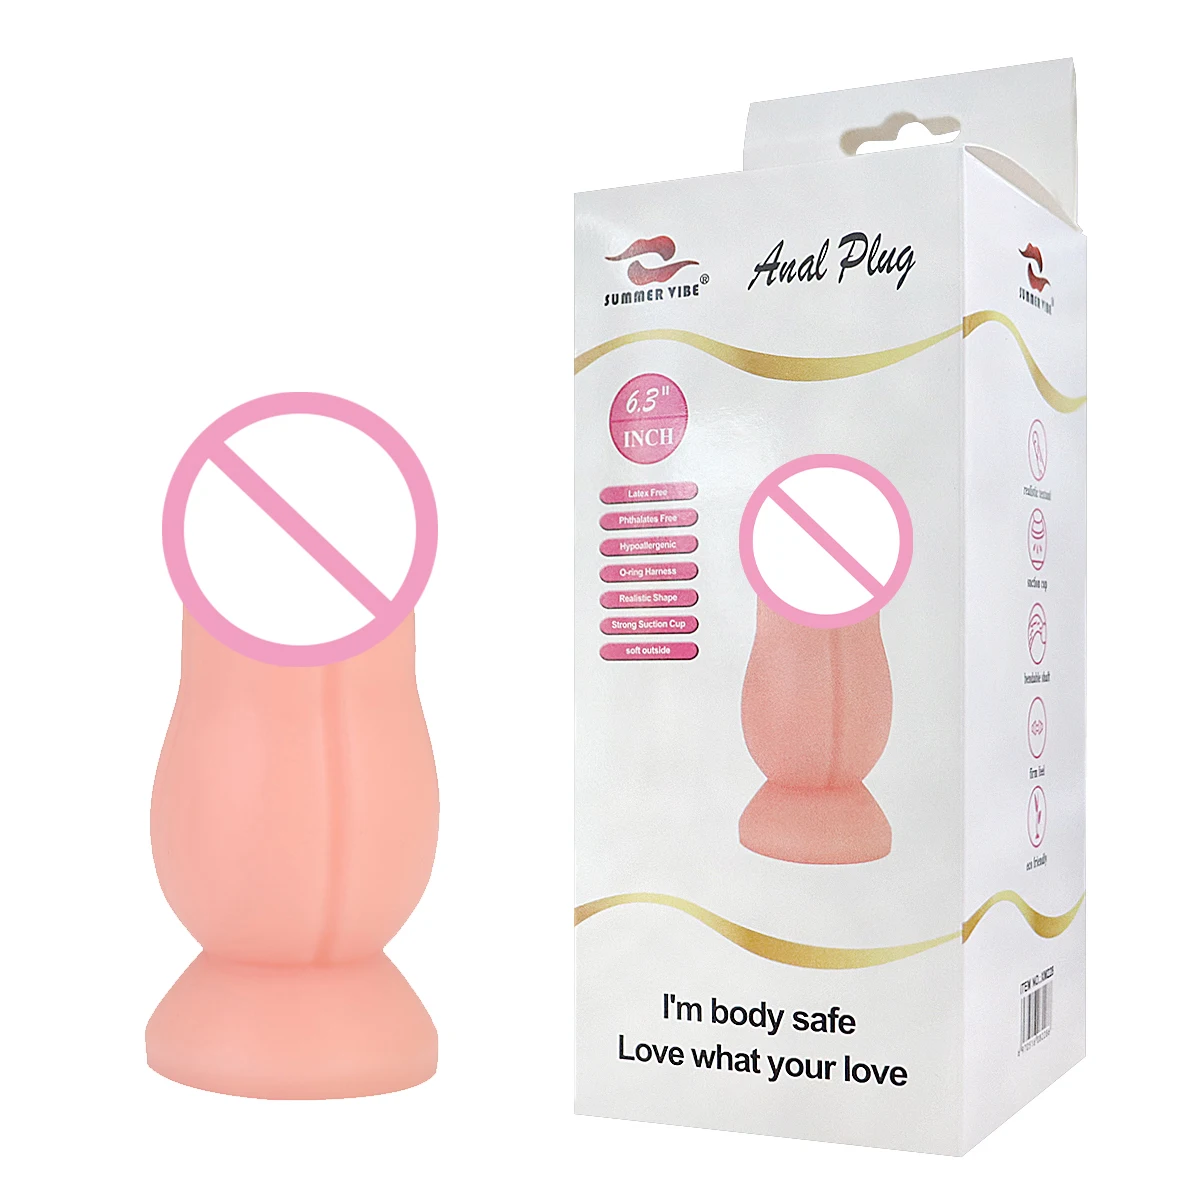 Wholesale Hot Selling Female Soft Dildo Masturbators Sex Male Penis Dildo Anal Plug Butt Plugs Sex Toys For Women Adult Products From m.alibaba image picture